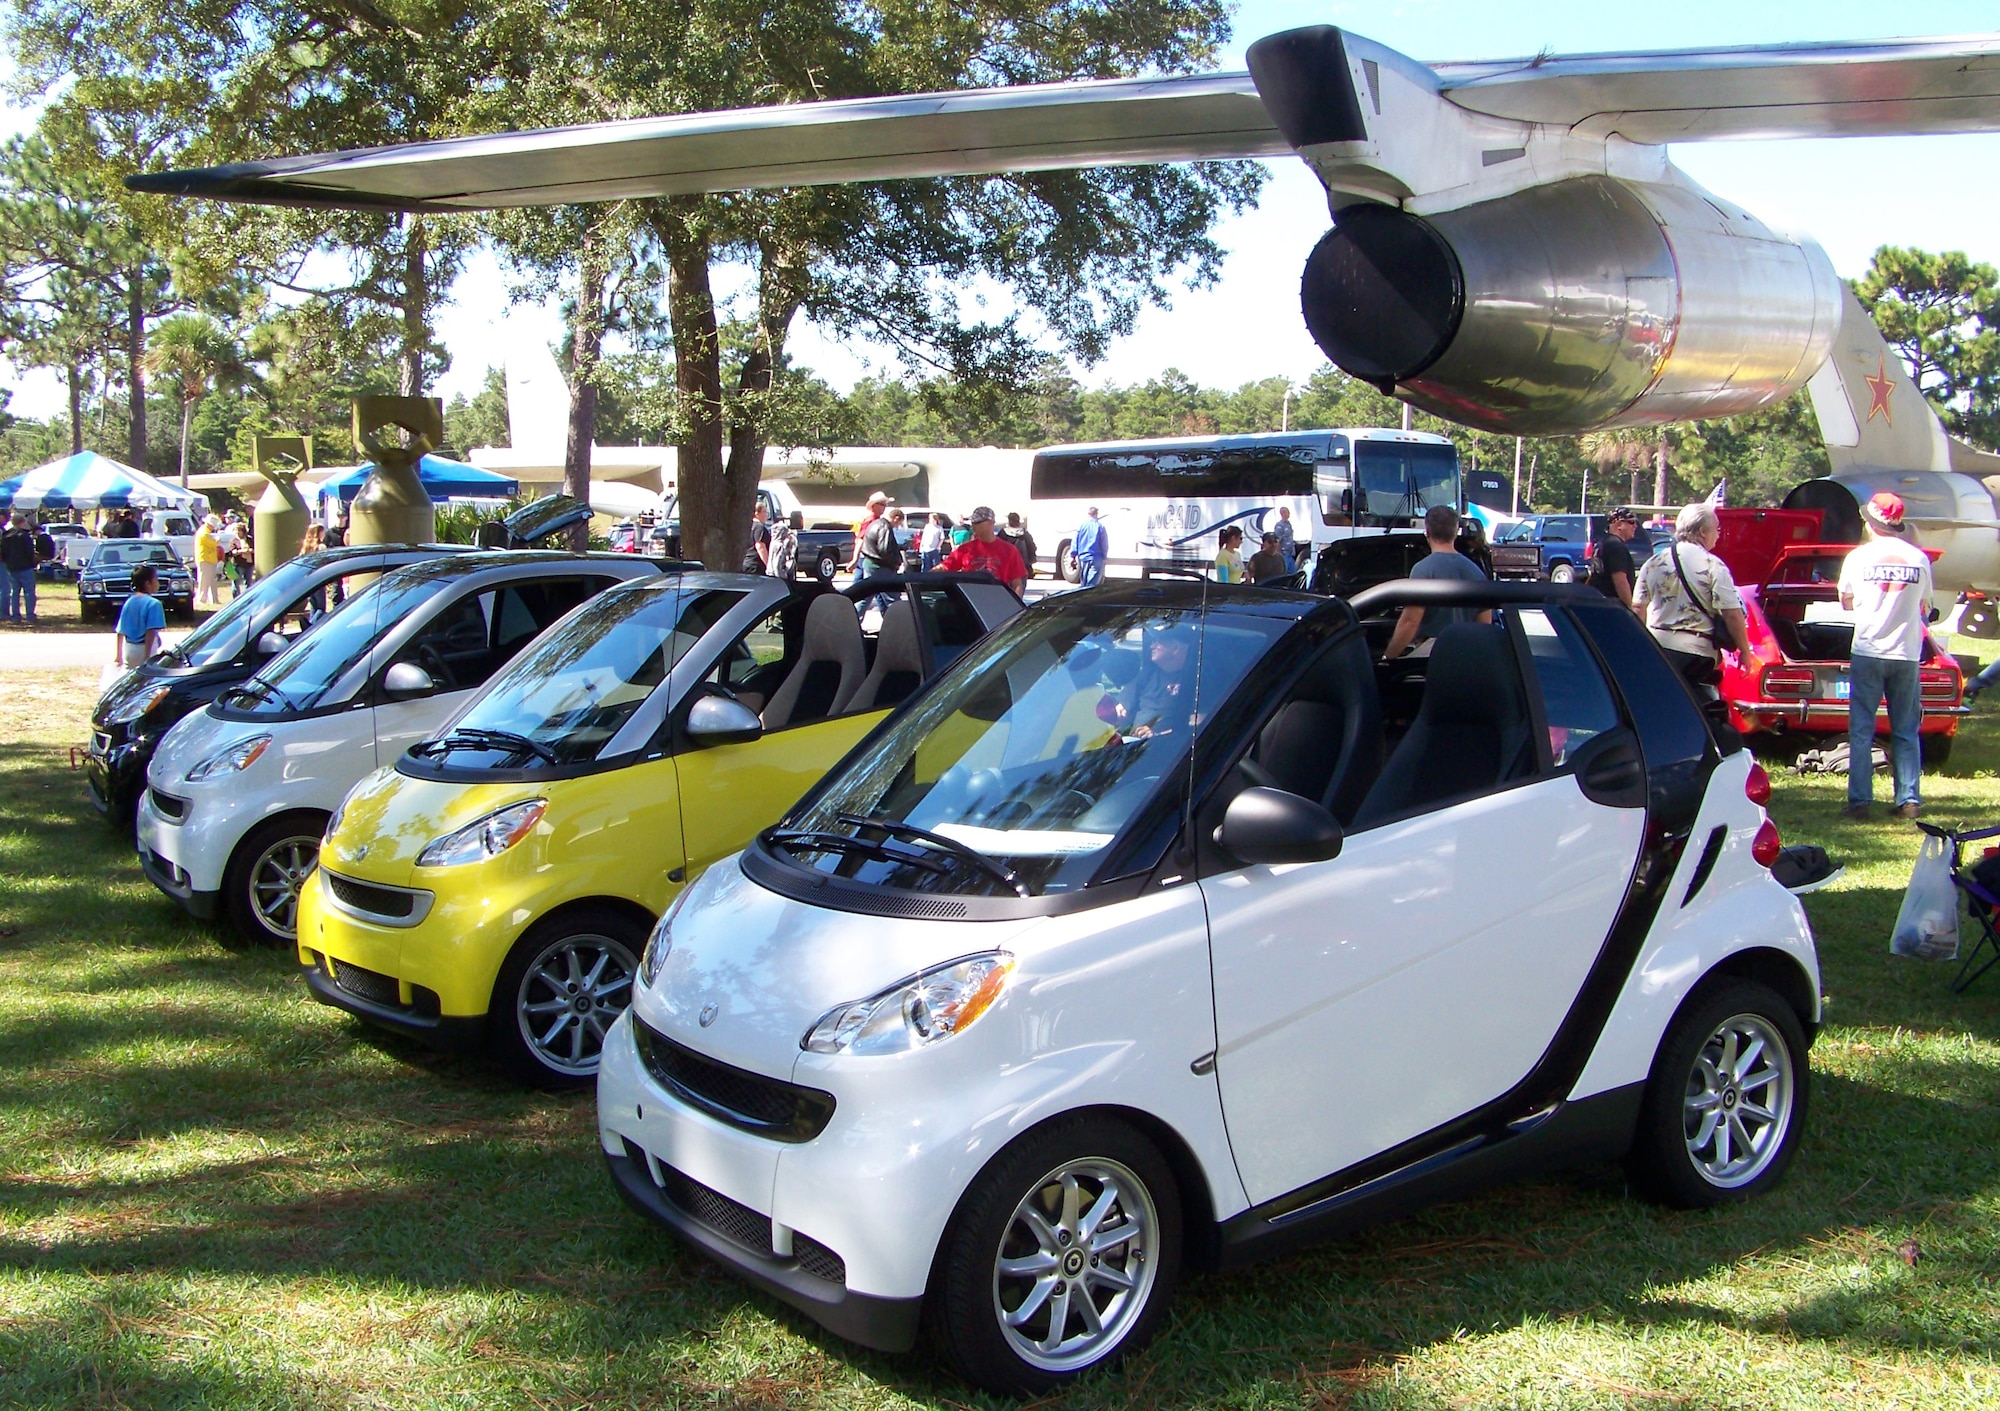 A collection of European Smart cars sit on display under the wing of an F-101 at the 2009 Commando Cruise-In at the Air Force Armament Museum Oct. 24. The cars were entered in different categories including size and country of origin. (U.S. Air Force photo by Airman 1st Class Joe McFadden.)